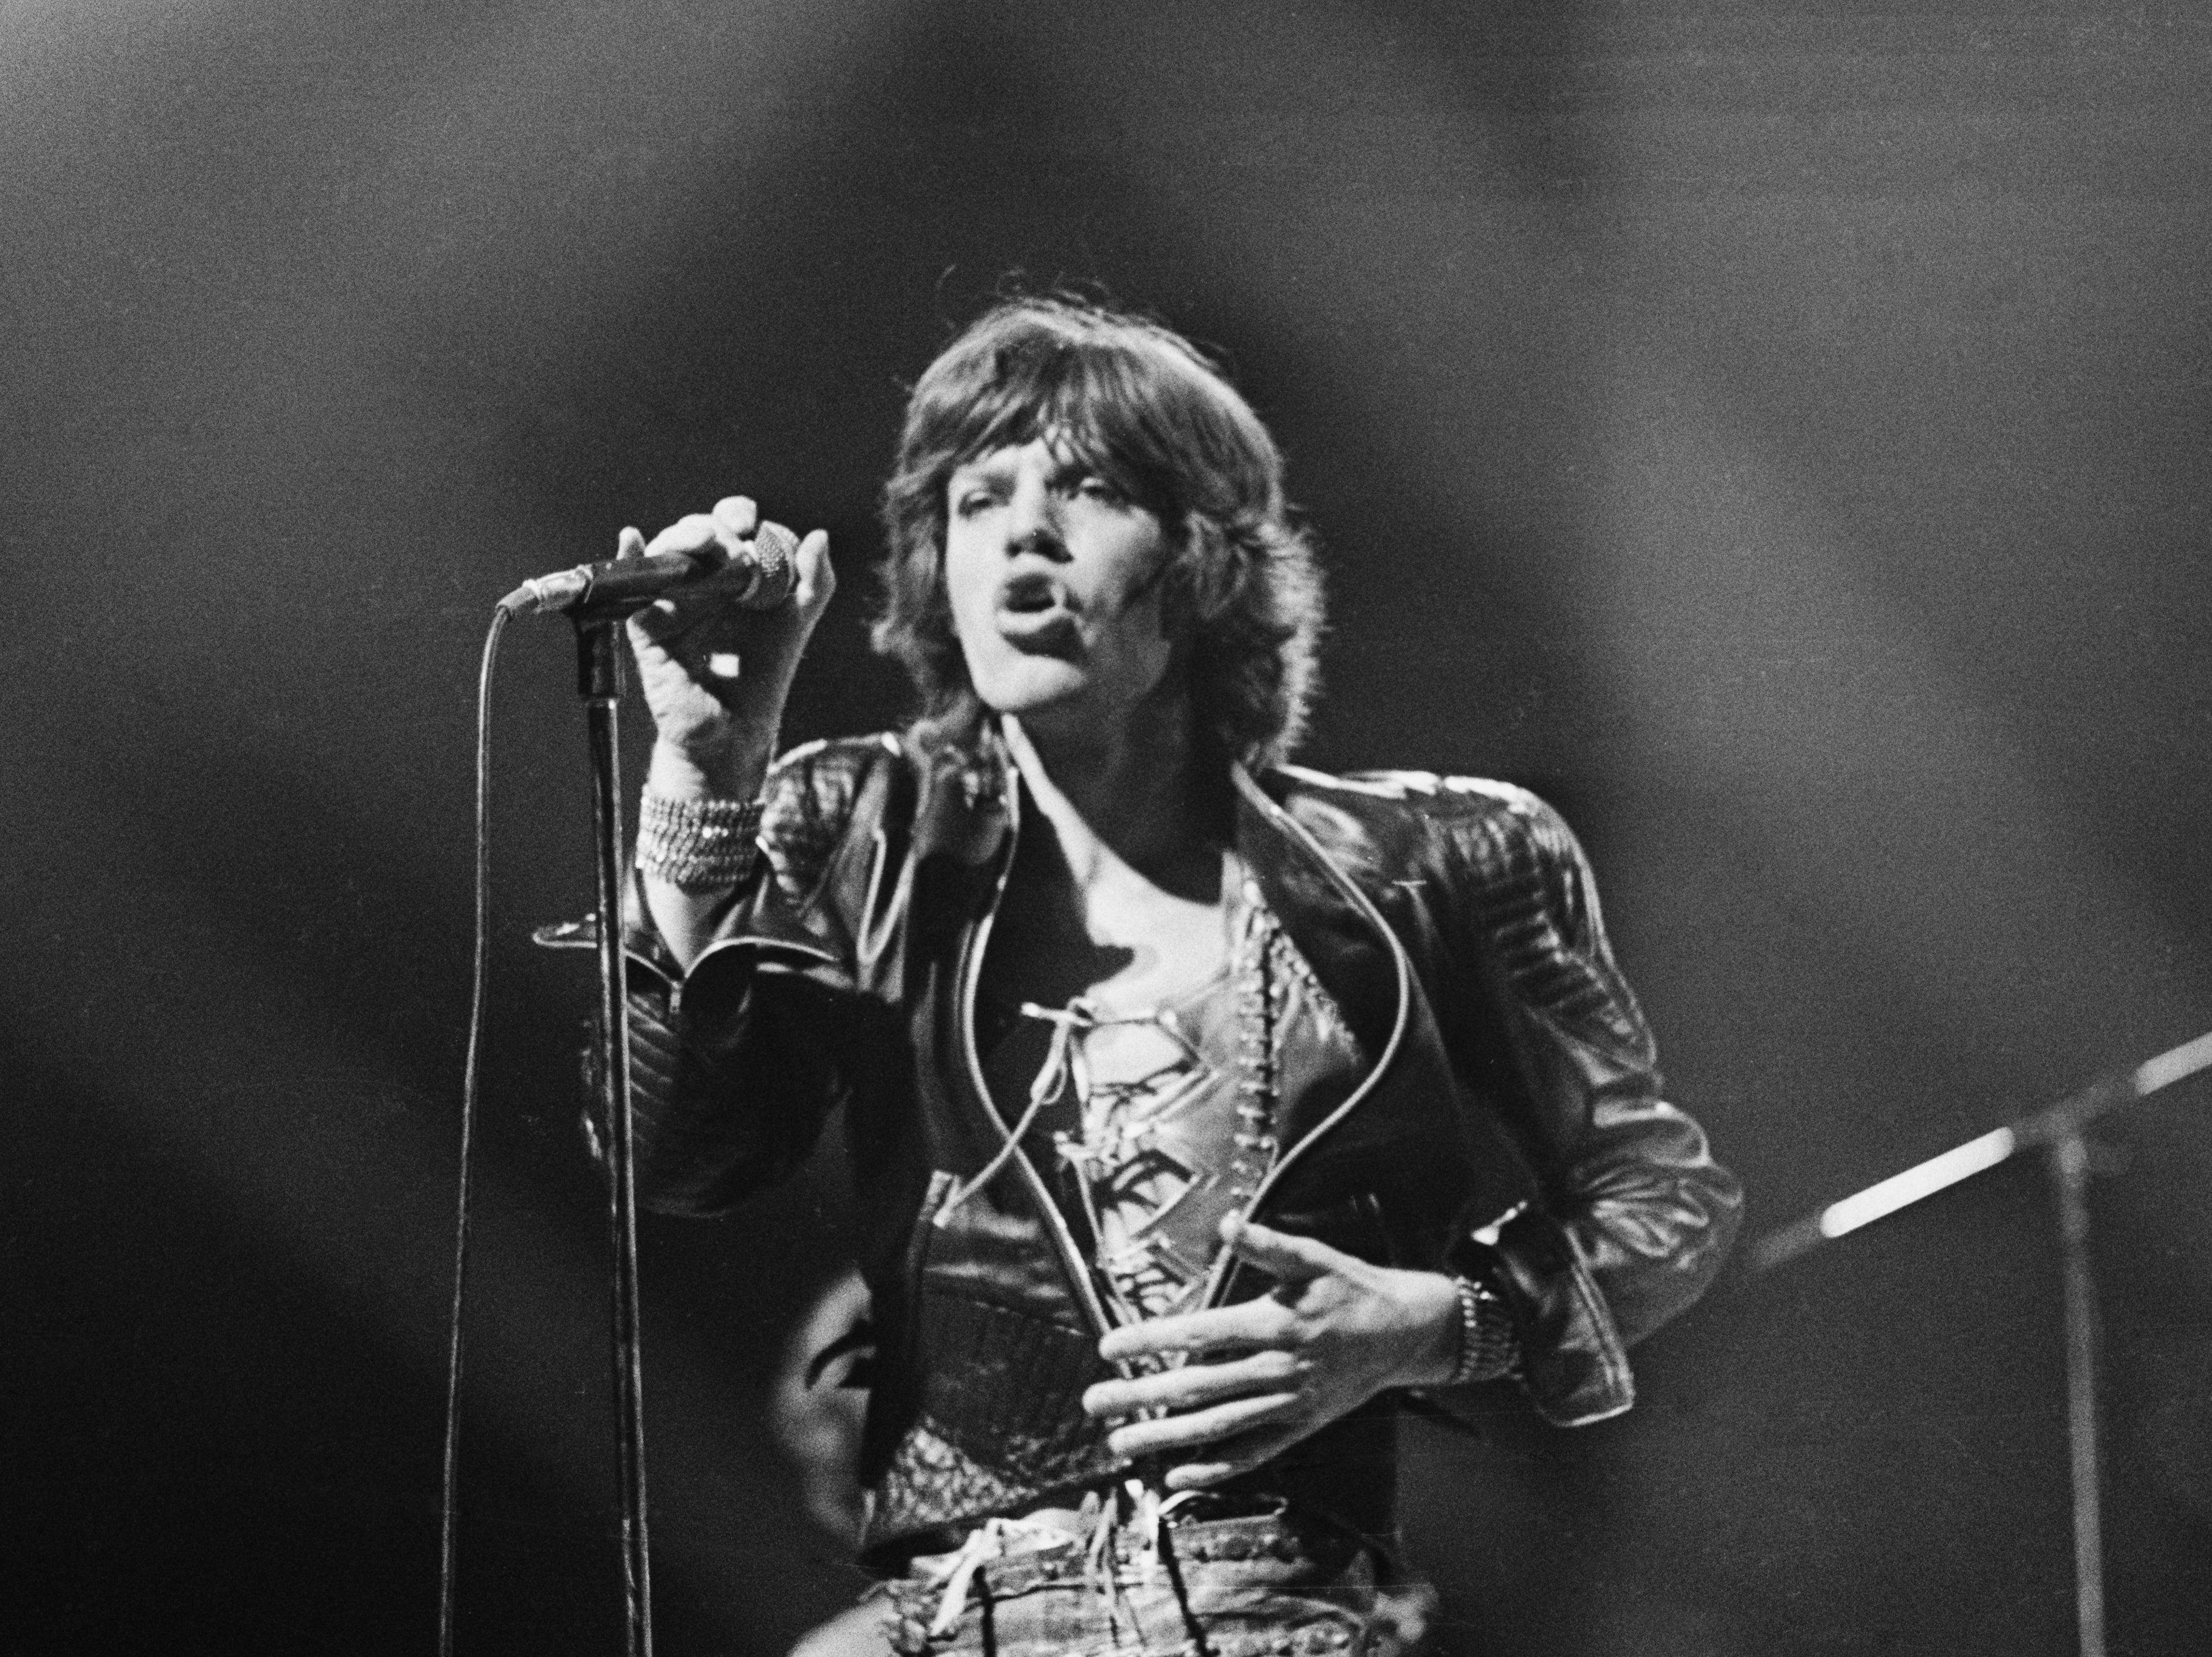 Exiled on main street: Mick Jagger performs with the Rolling Stones in 1972